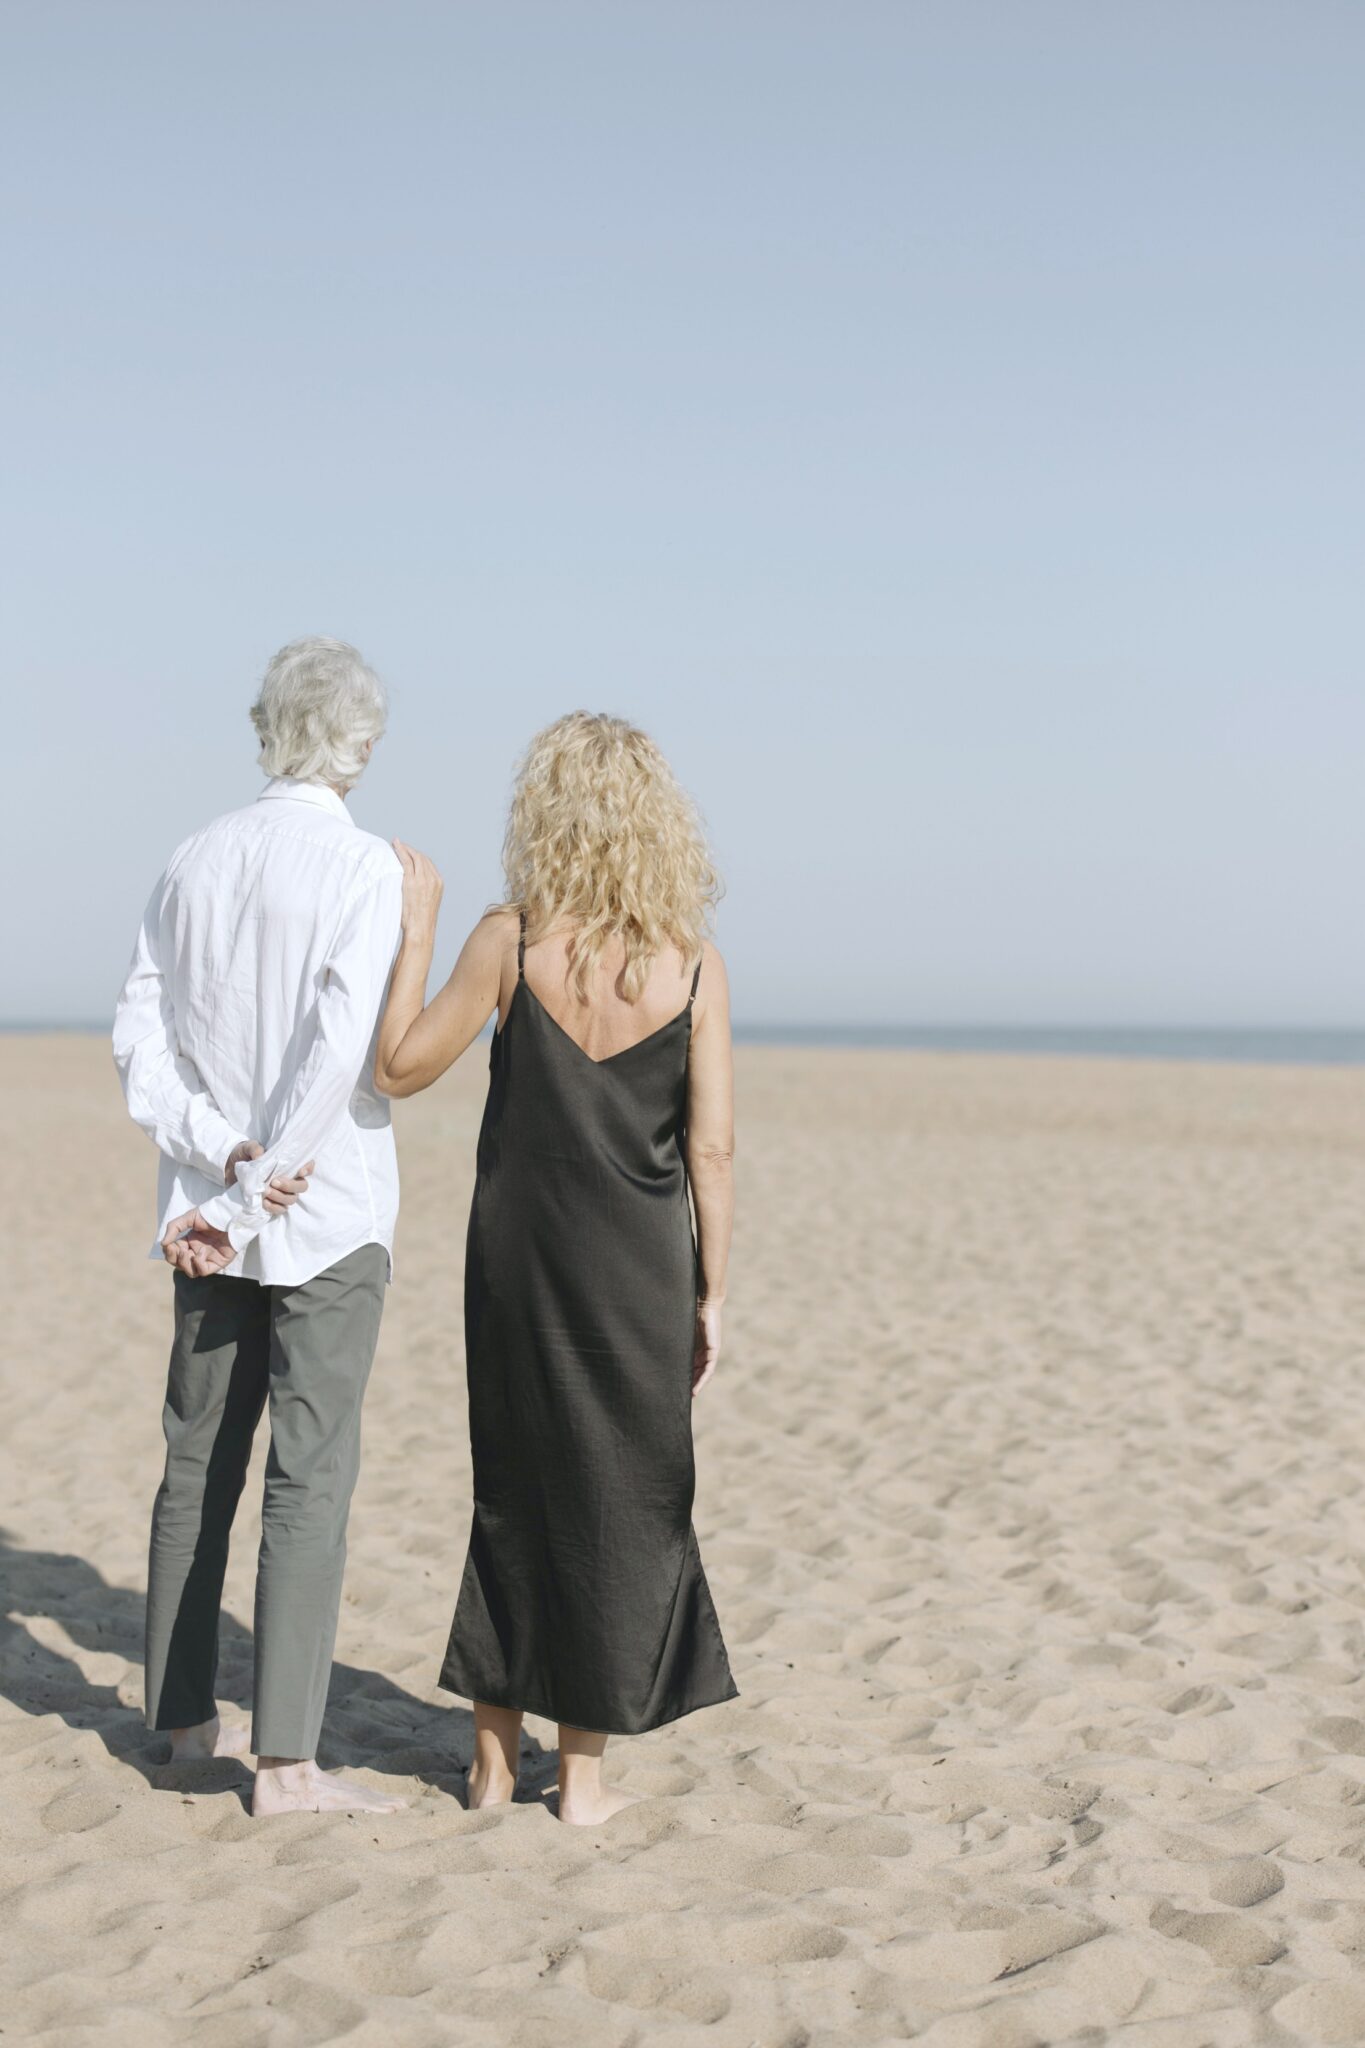 An older couple stand on a beach and look beyond the horizon. The woman has an arm on his shoulder.